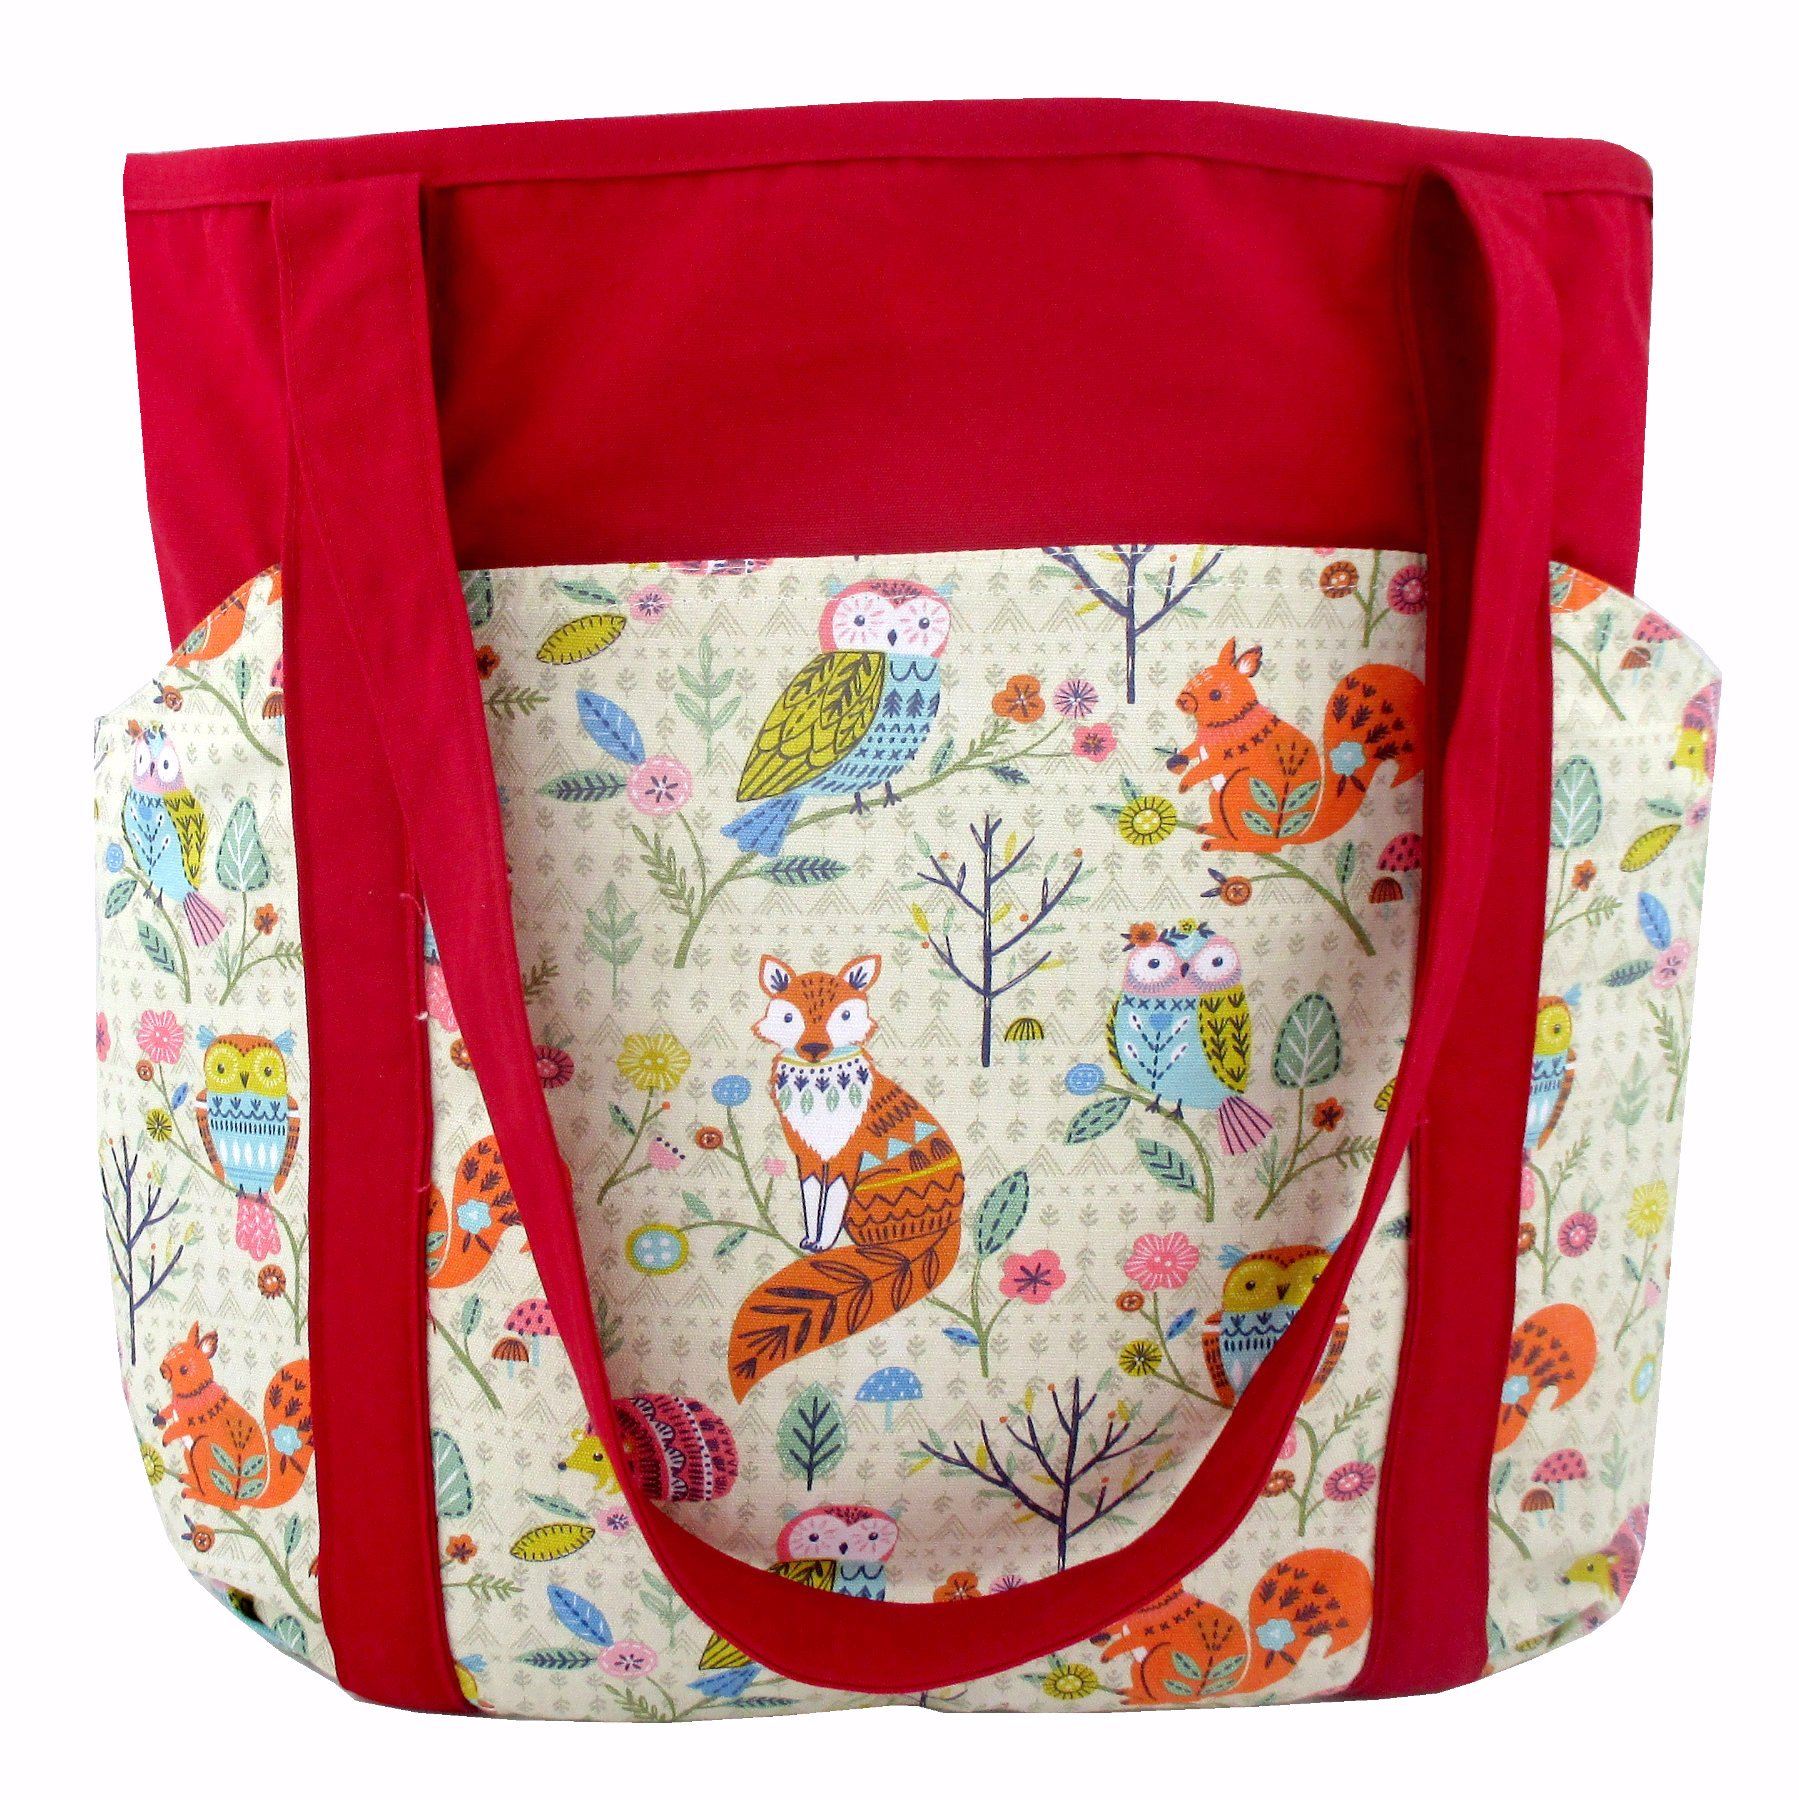 Red Owl Squirrel Fox Animal Print Large All Purpose Tote Bag with Pockets